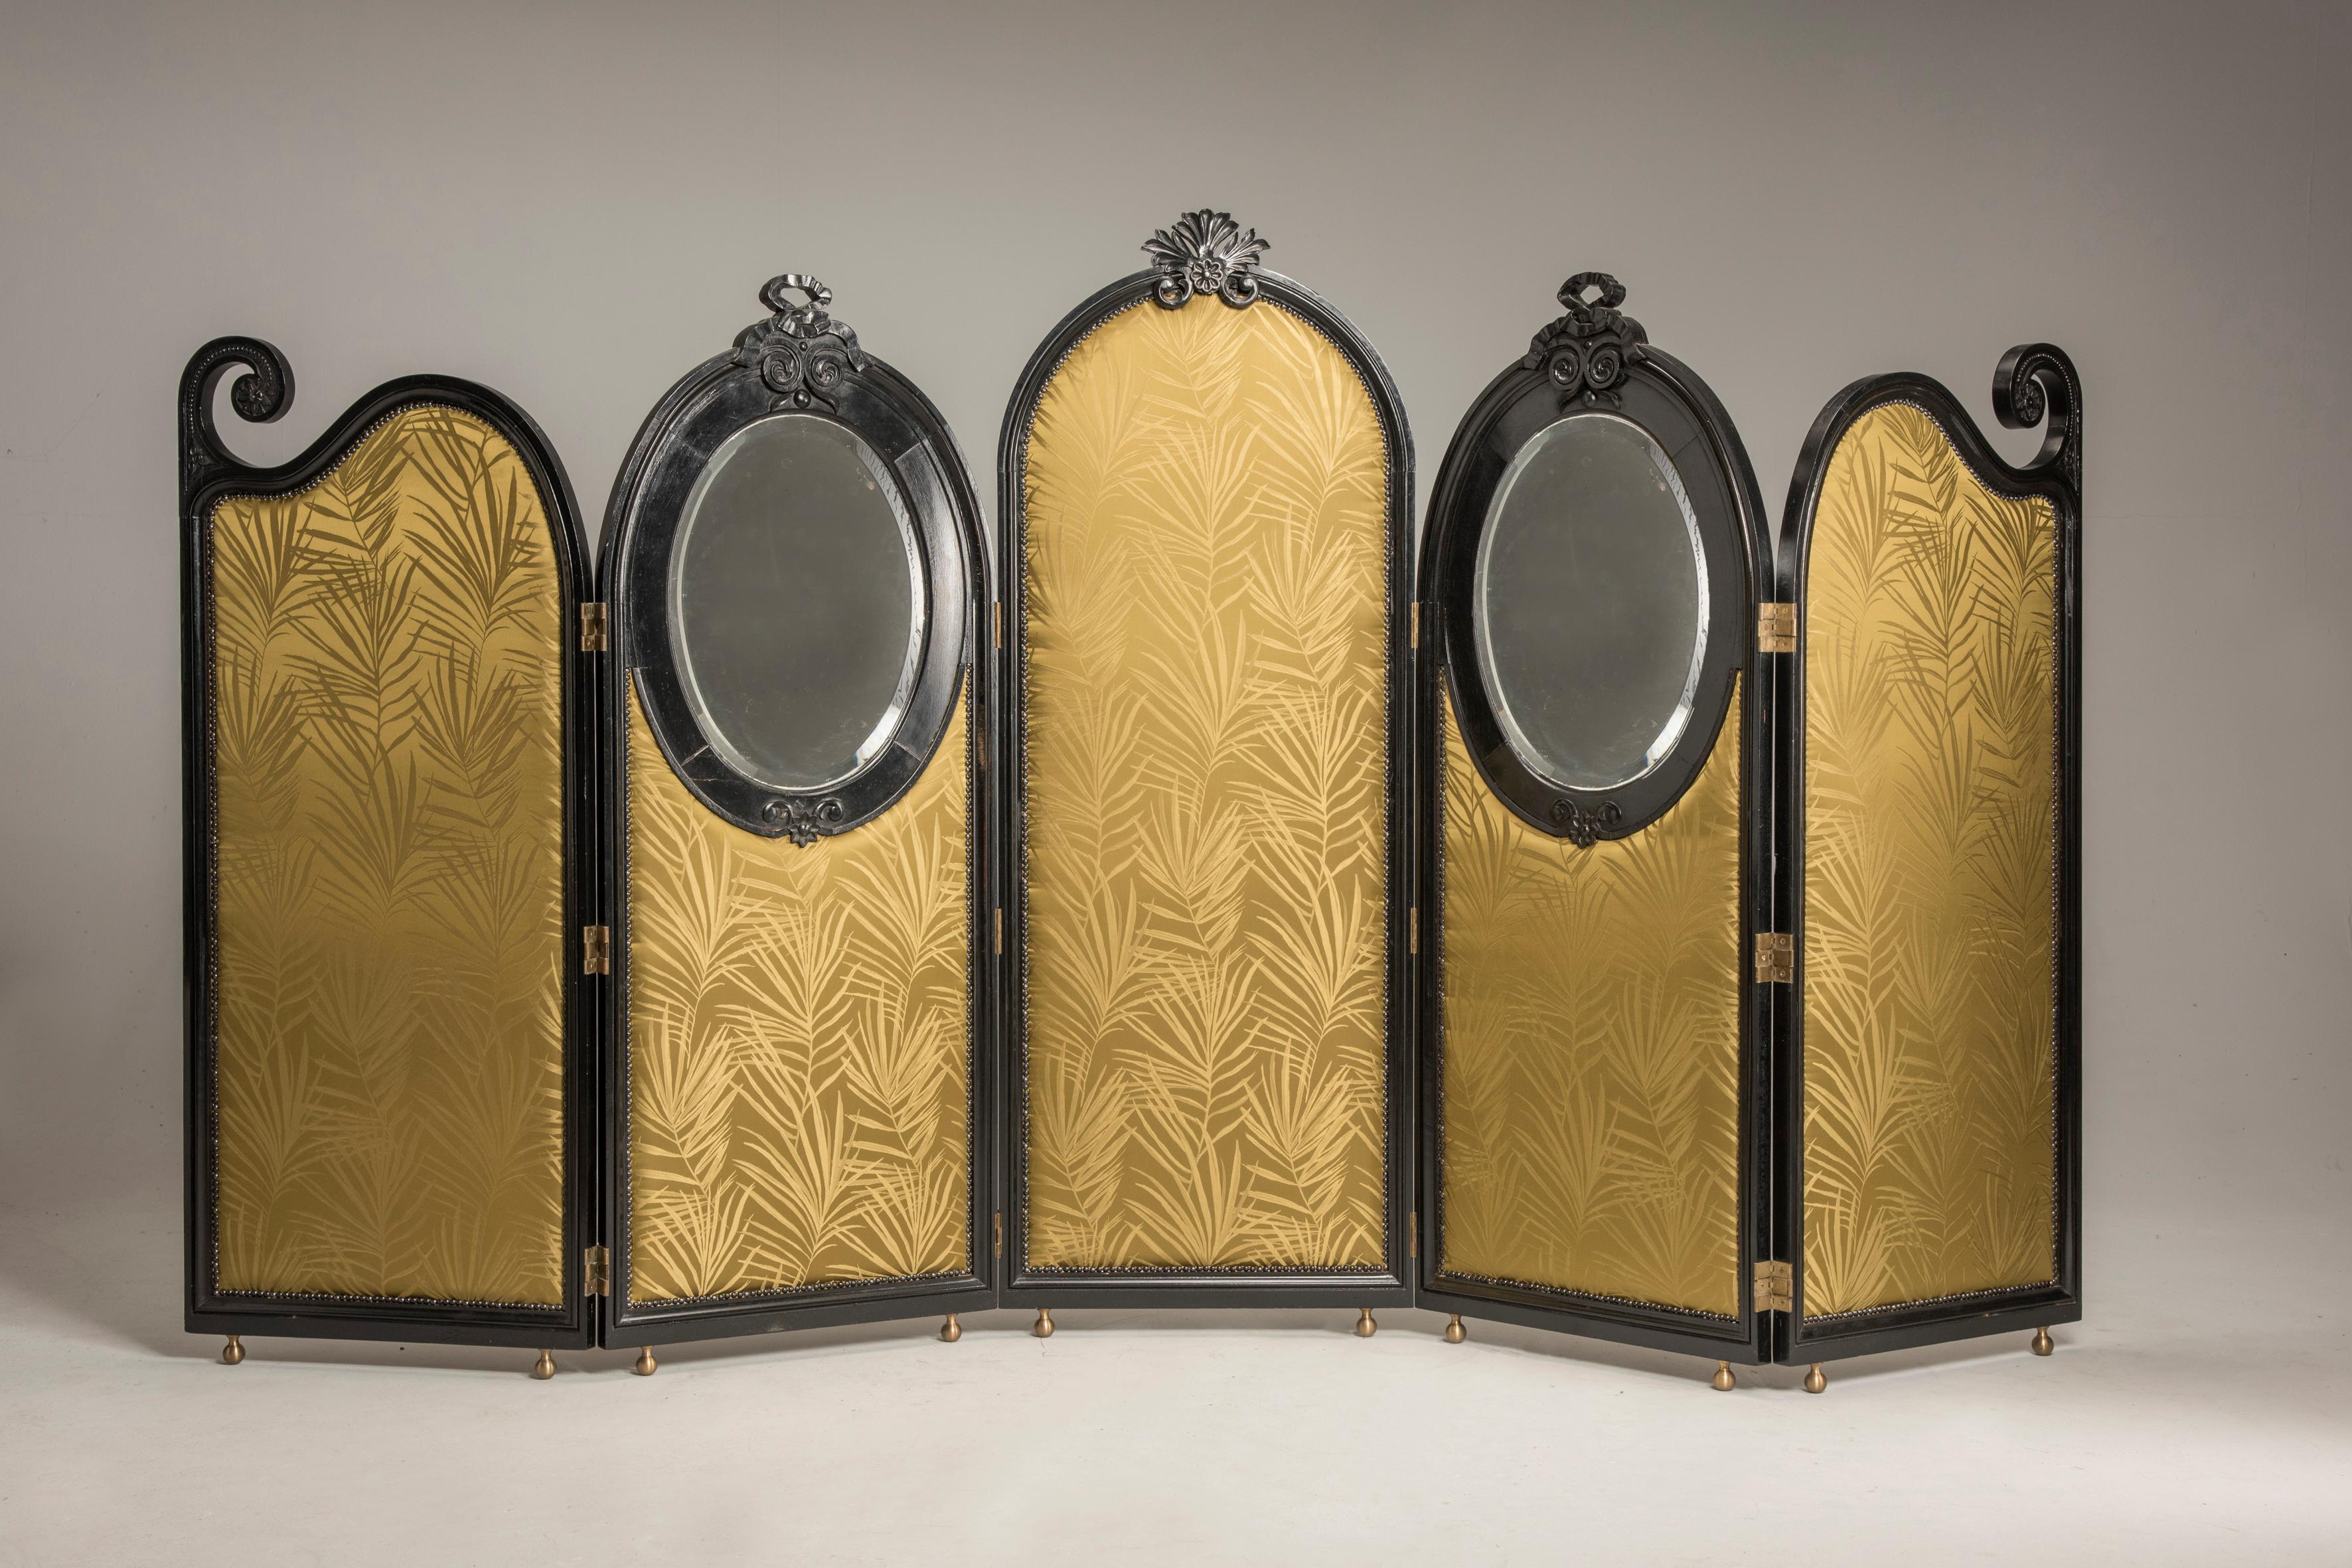 Art Nouveau liberty black wood green palm fabric five panels and oval mirrors room divider

An Art Nouveau screen composed by five folding panels, two of them carry two oval mirrors with beveled original glass. Ovals are on the front part, while